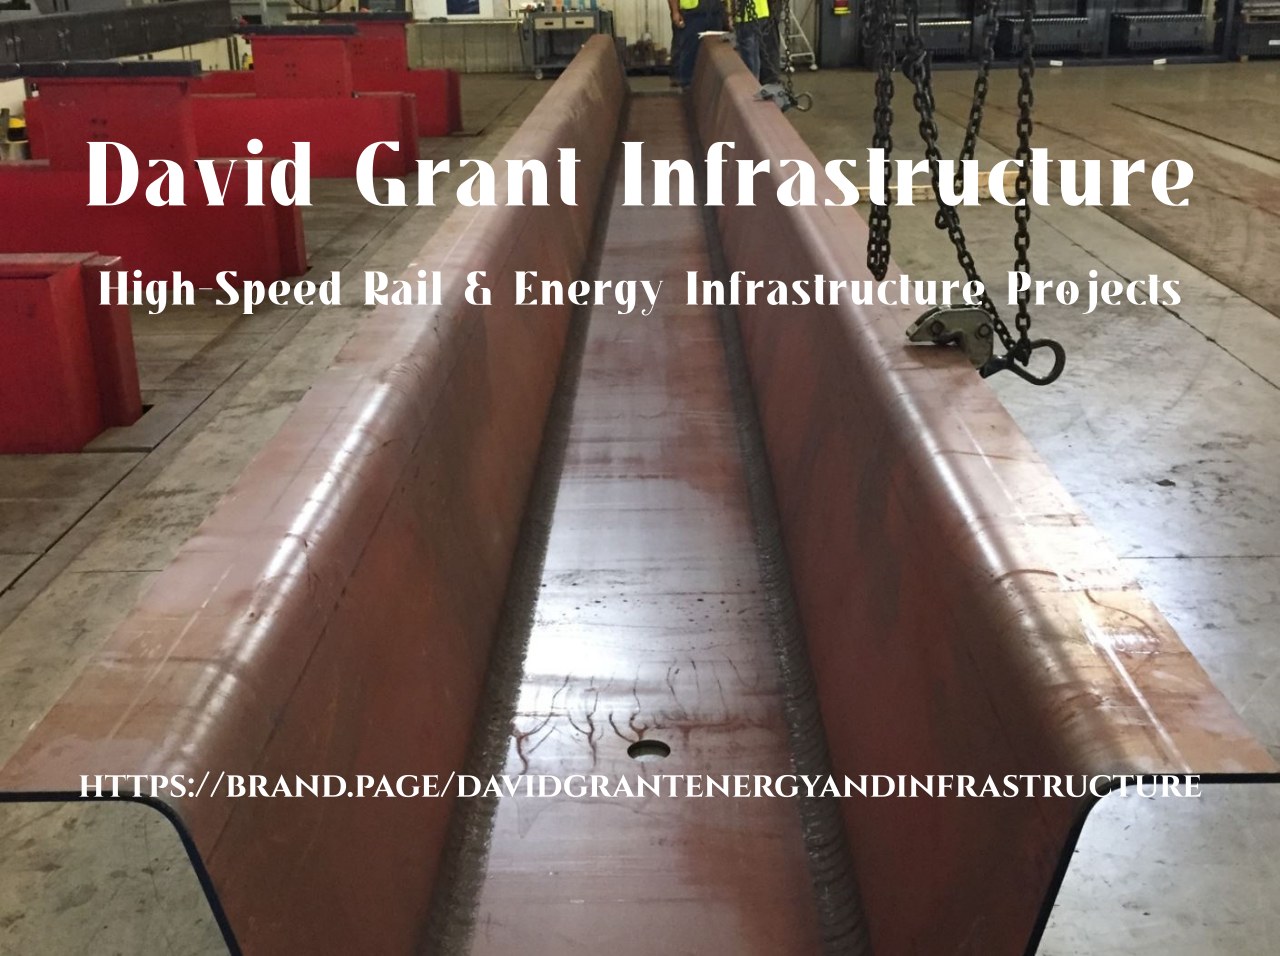 David Grant Energy & Infrastructure Inc.'s web page